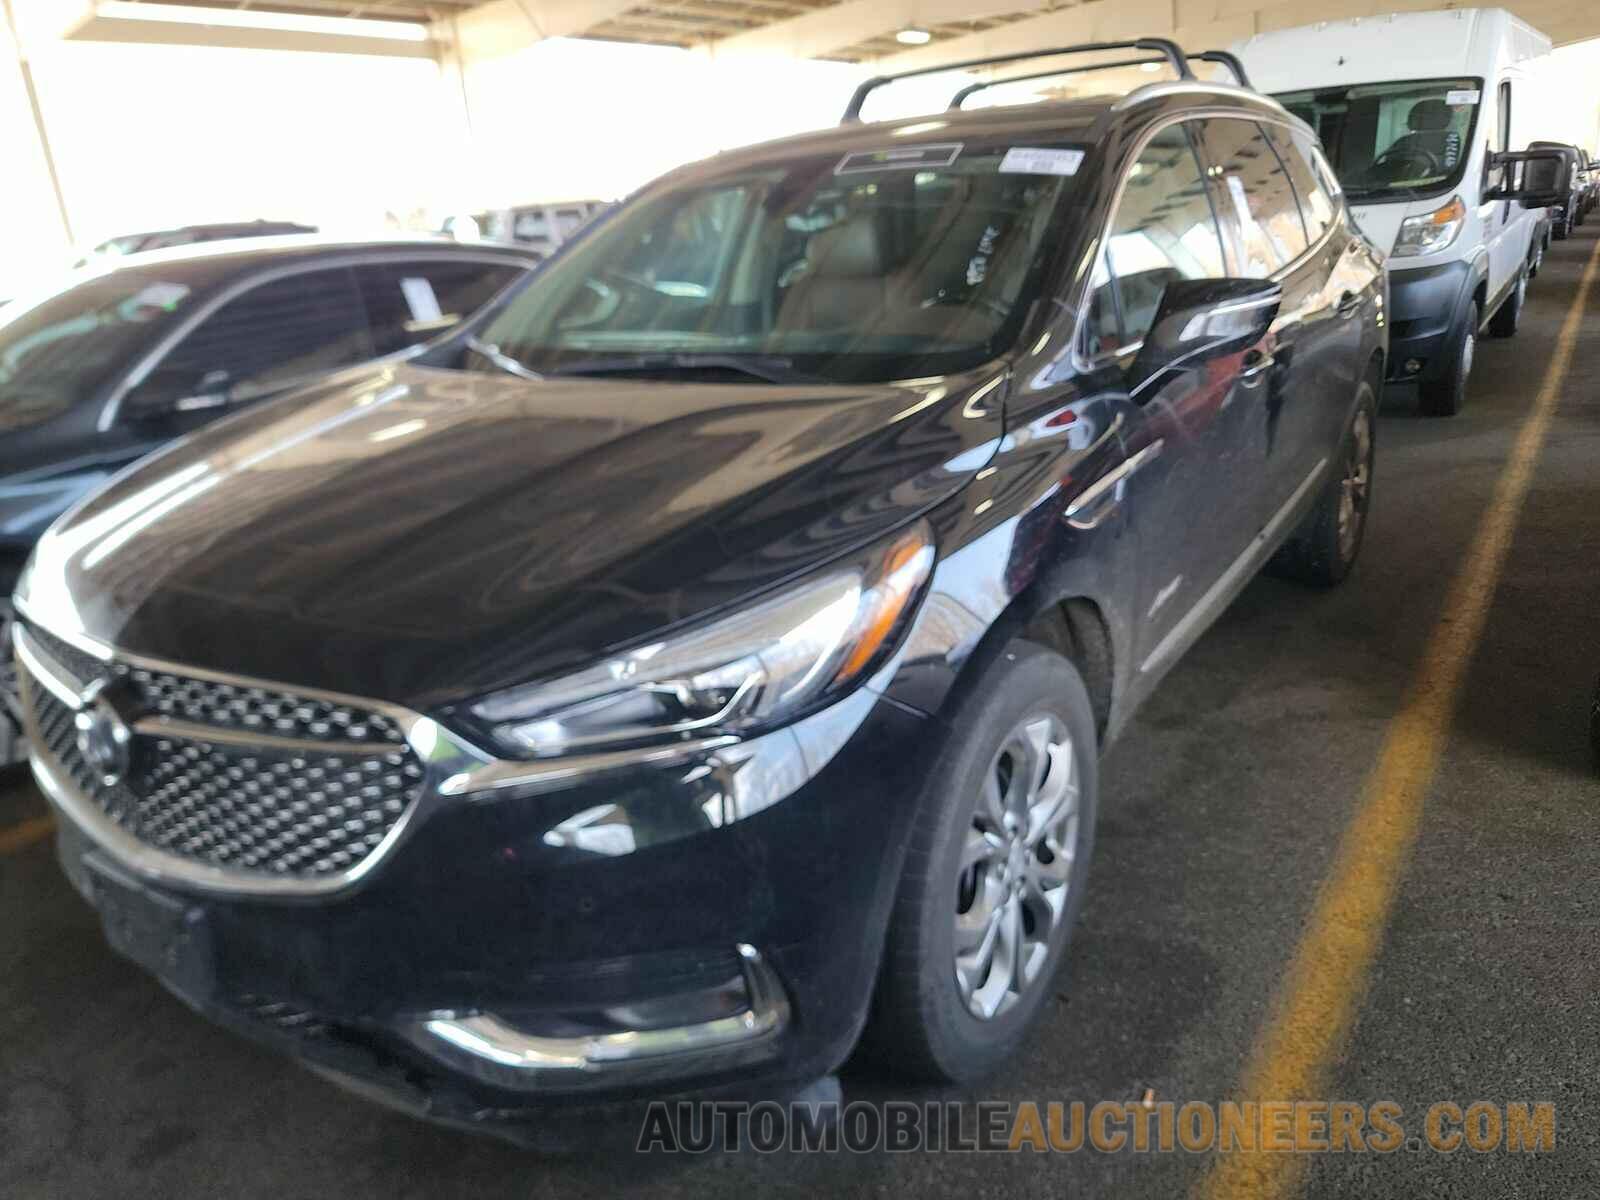 5GAEVCKW2MJ118790 Buick Enclave 2021